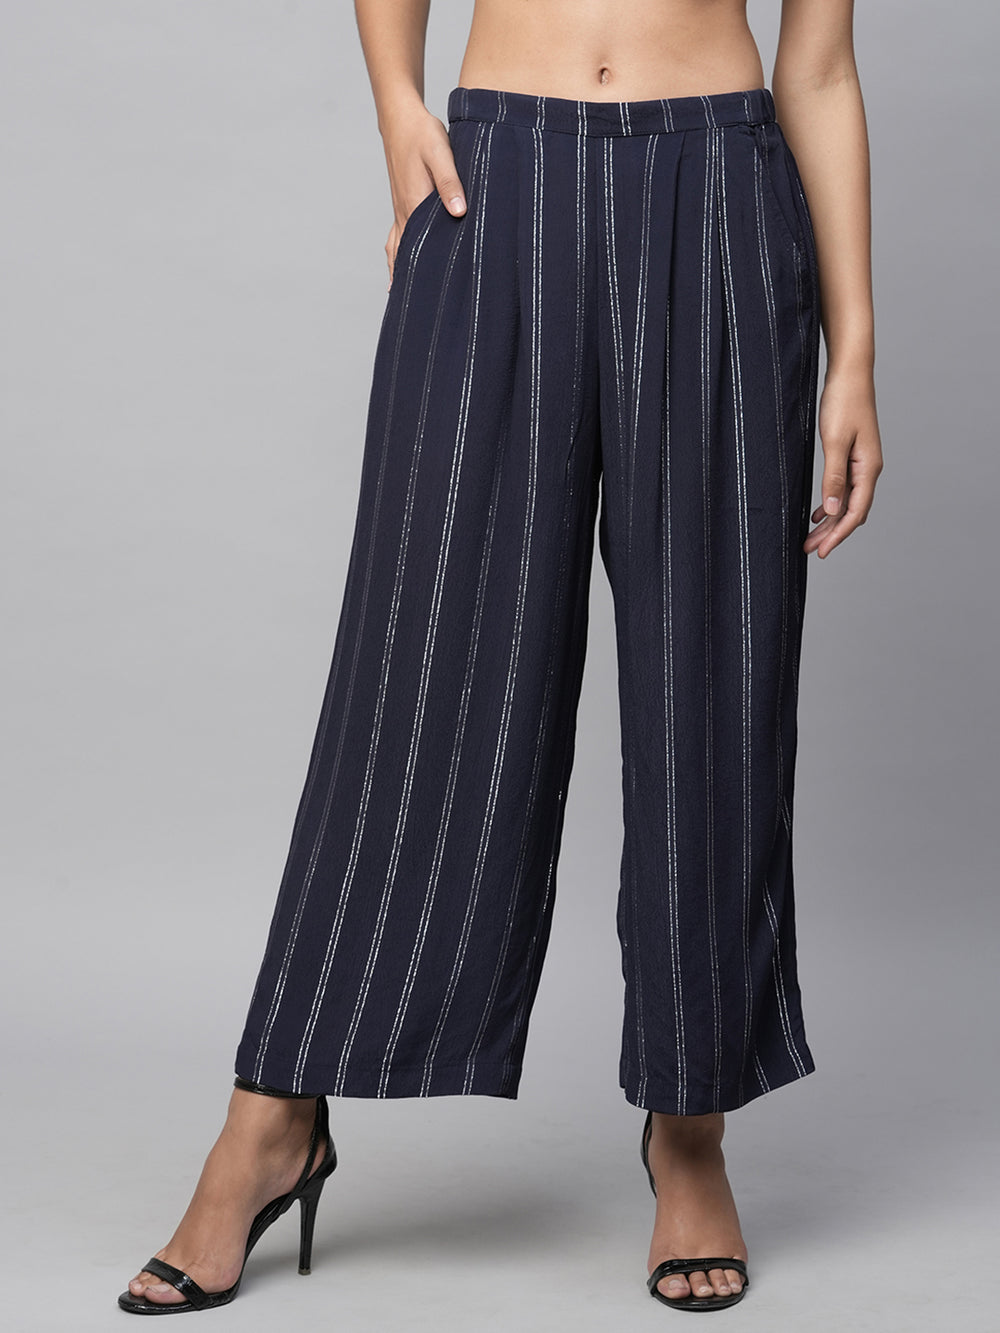 Buy Now Chemistry Lurex Viscose Crepe Pleated ]Wide Leg Fluid Trousers